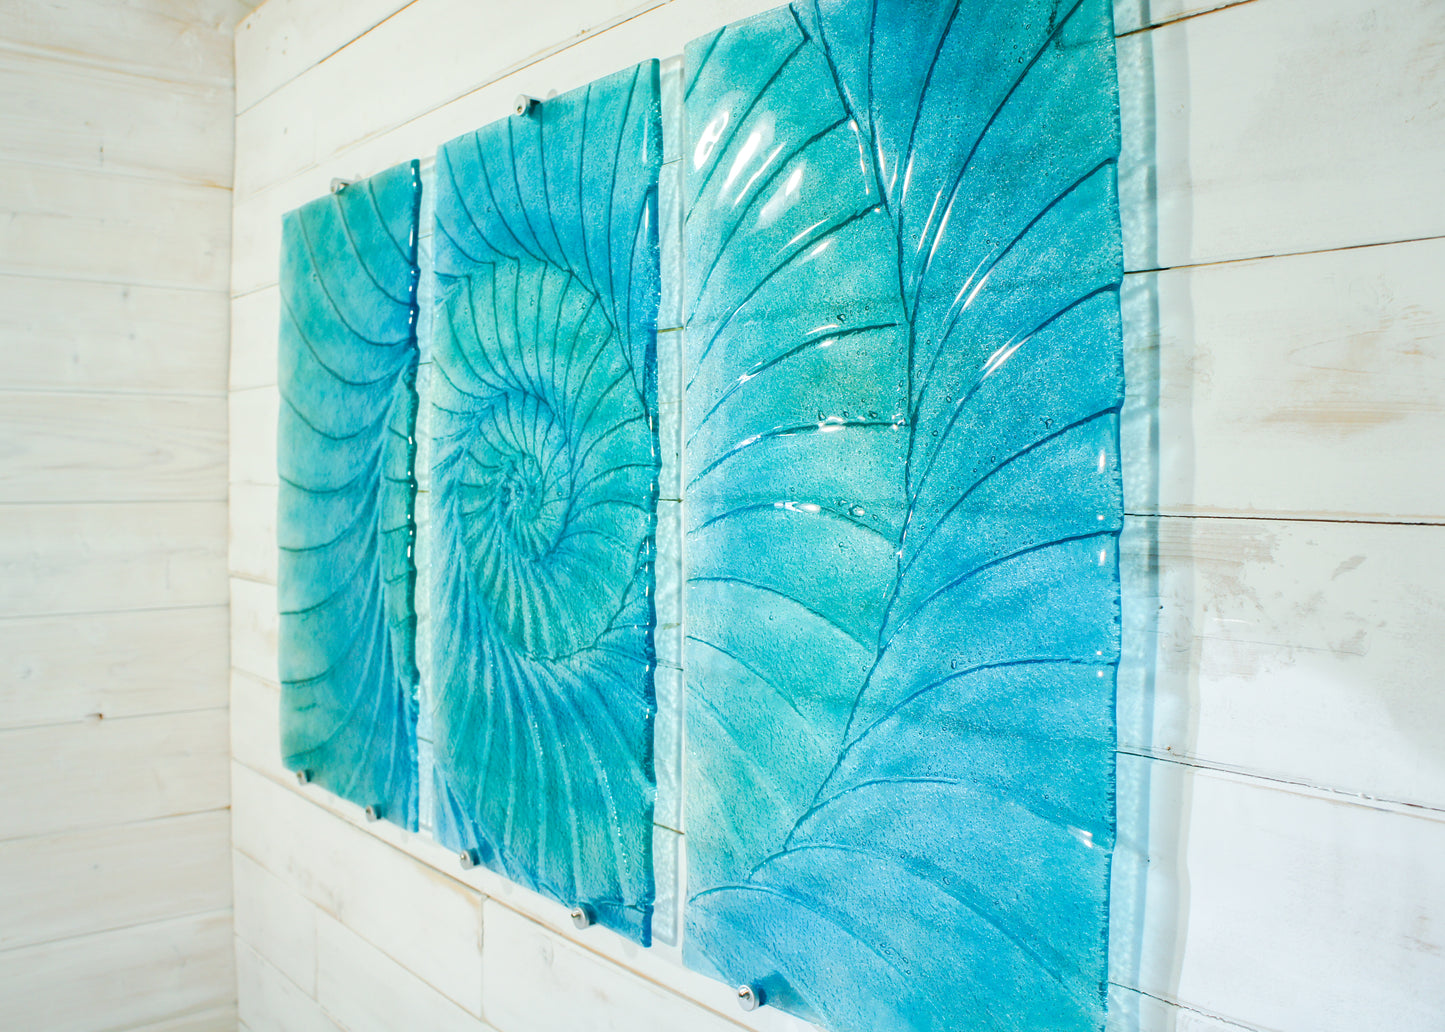 Triptych Ammonite Panels OVERALL 100x60cm (40x23") incl. gaps and 9 fixings - Blue/Turquoise - Each Panel 30x60cm (12x23") Large Portrait Fossil Fused Glass Wall Art